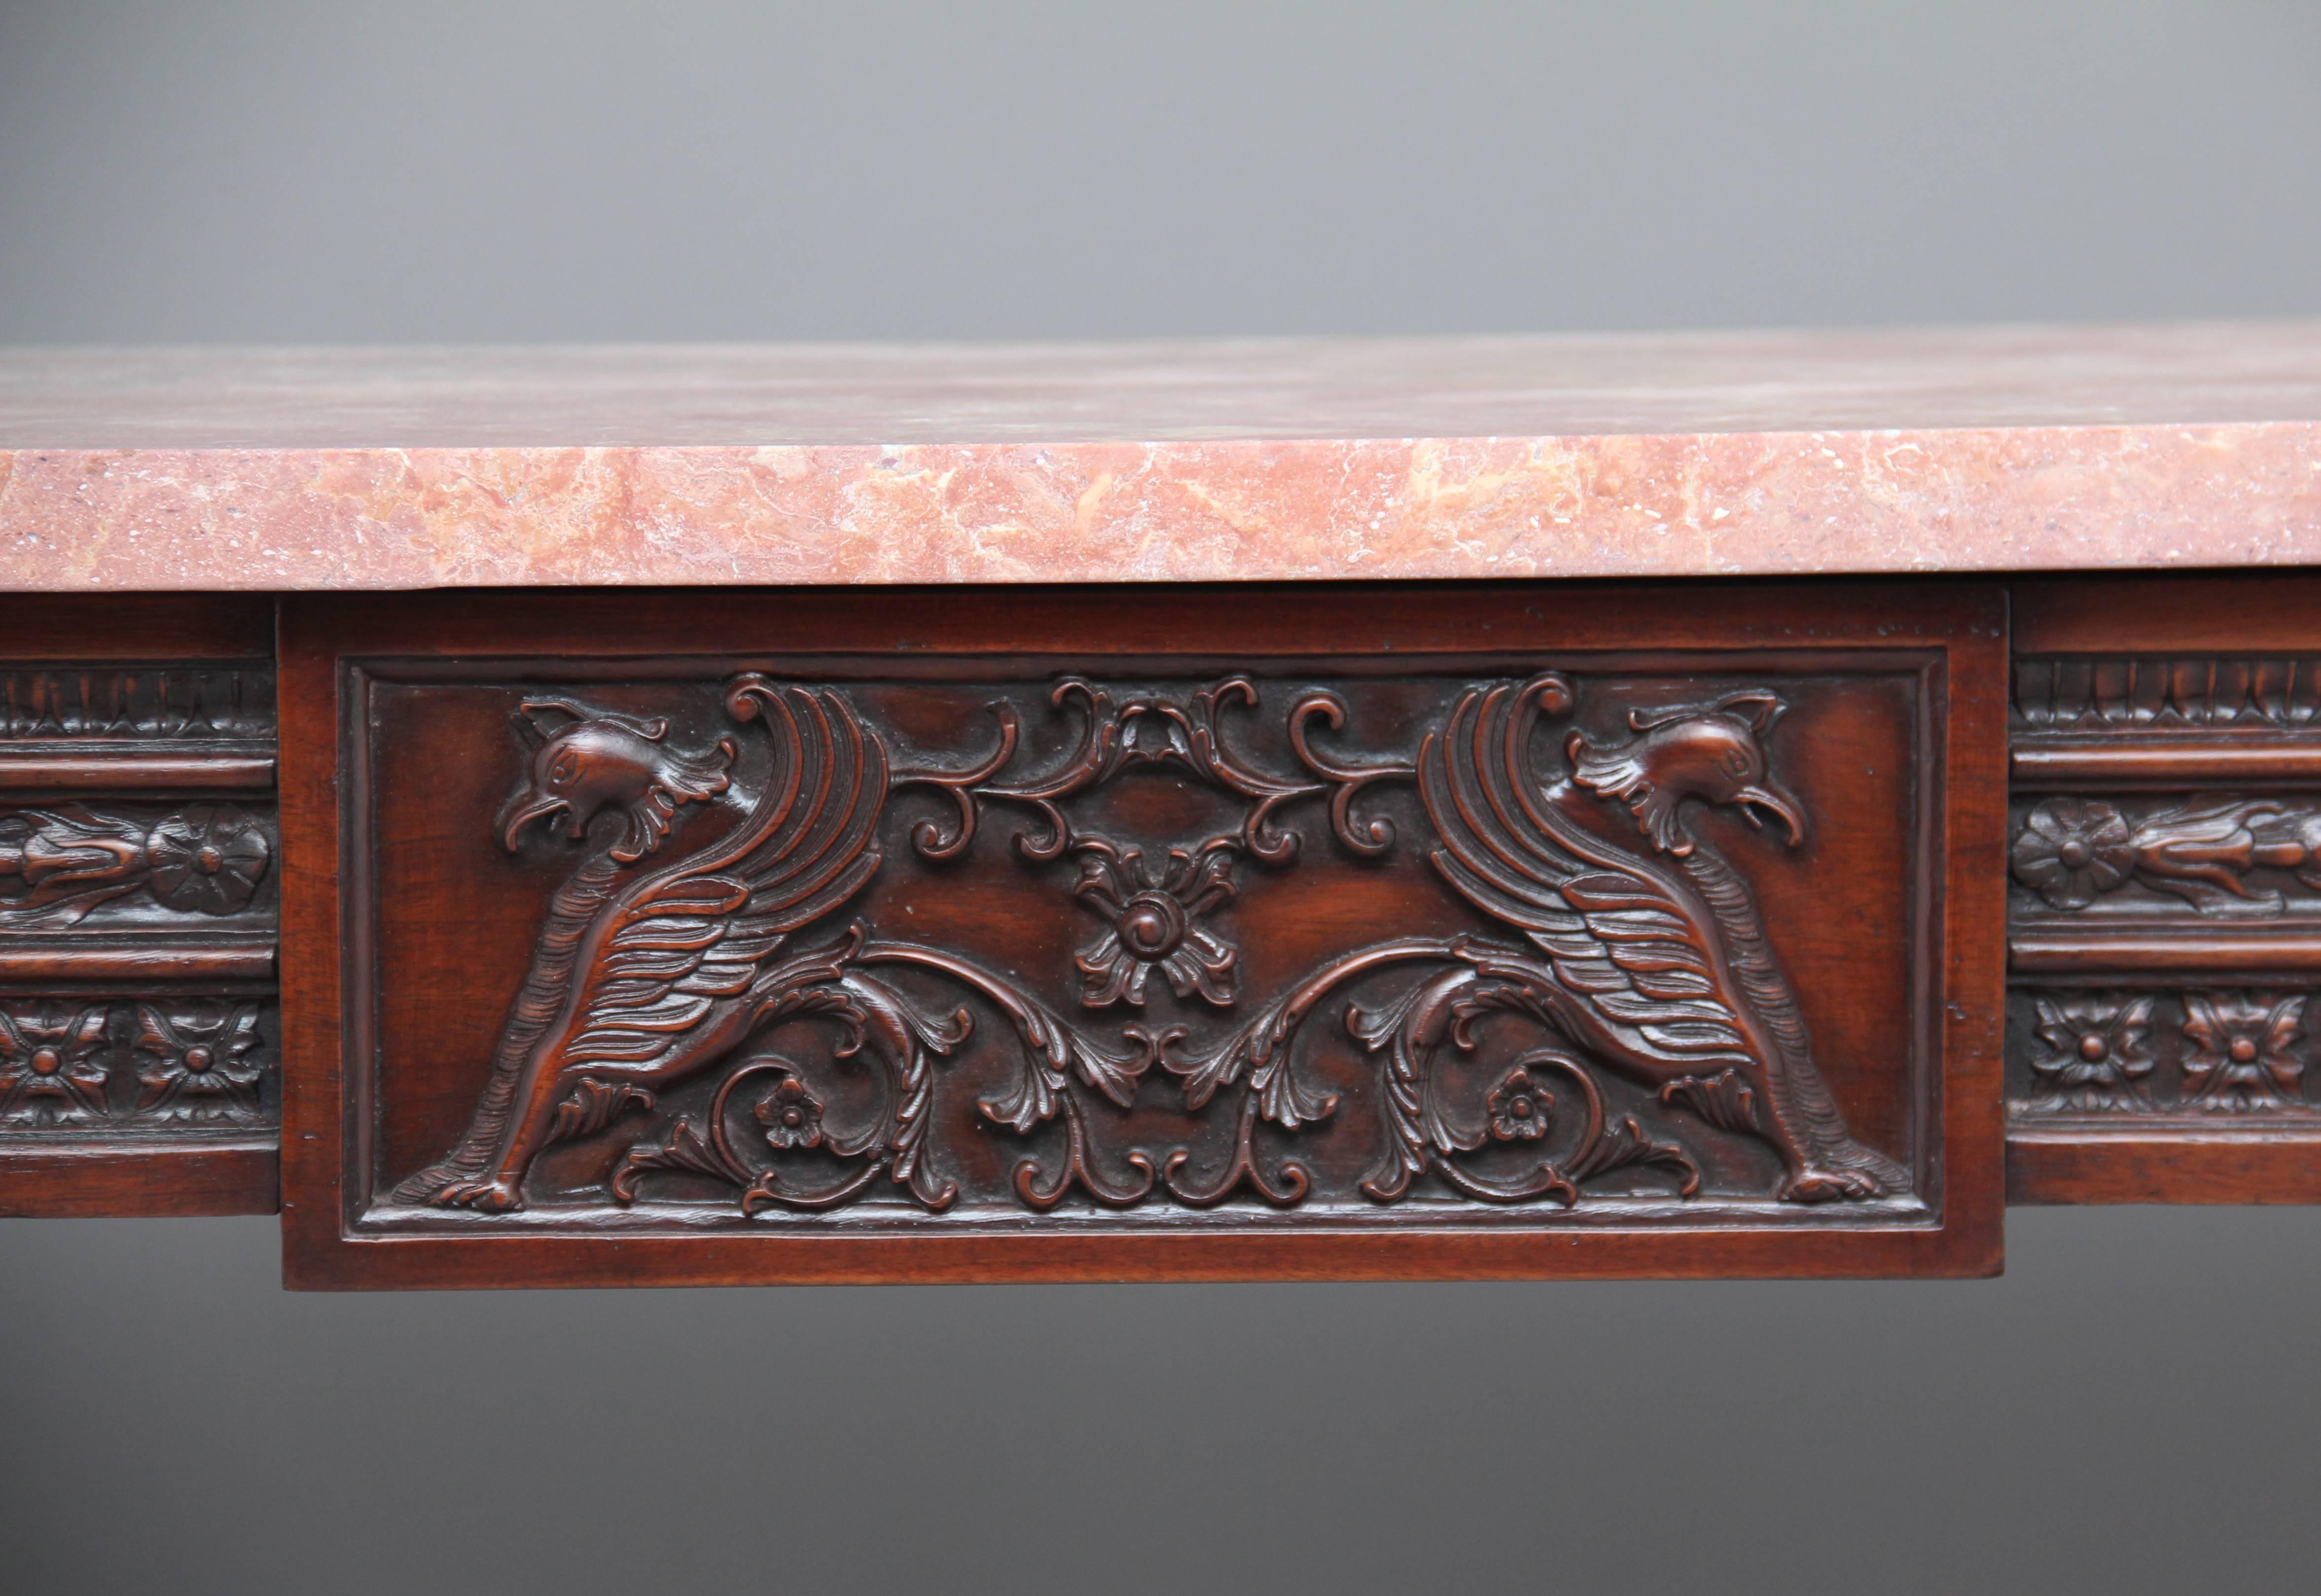 Great Britain (UK) Pair of Early 20th Century Carved Mahogany Marble-Top Console Tables